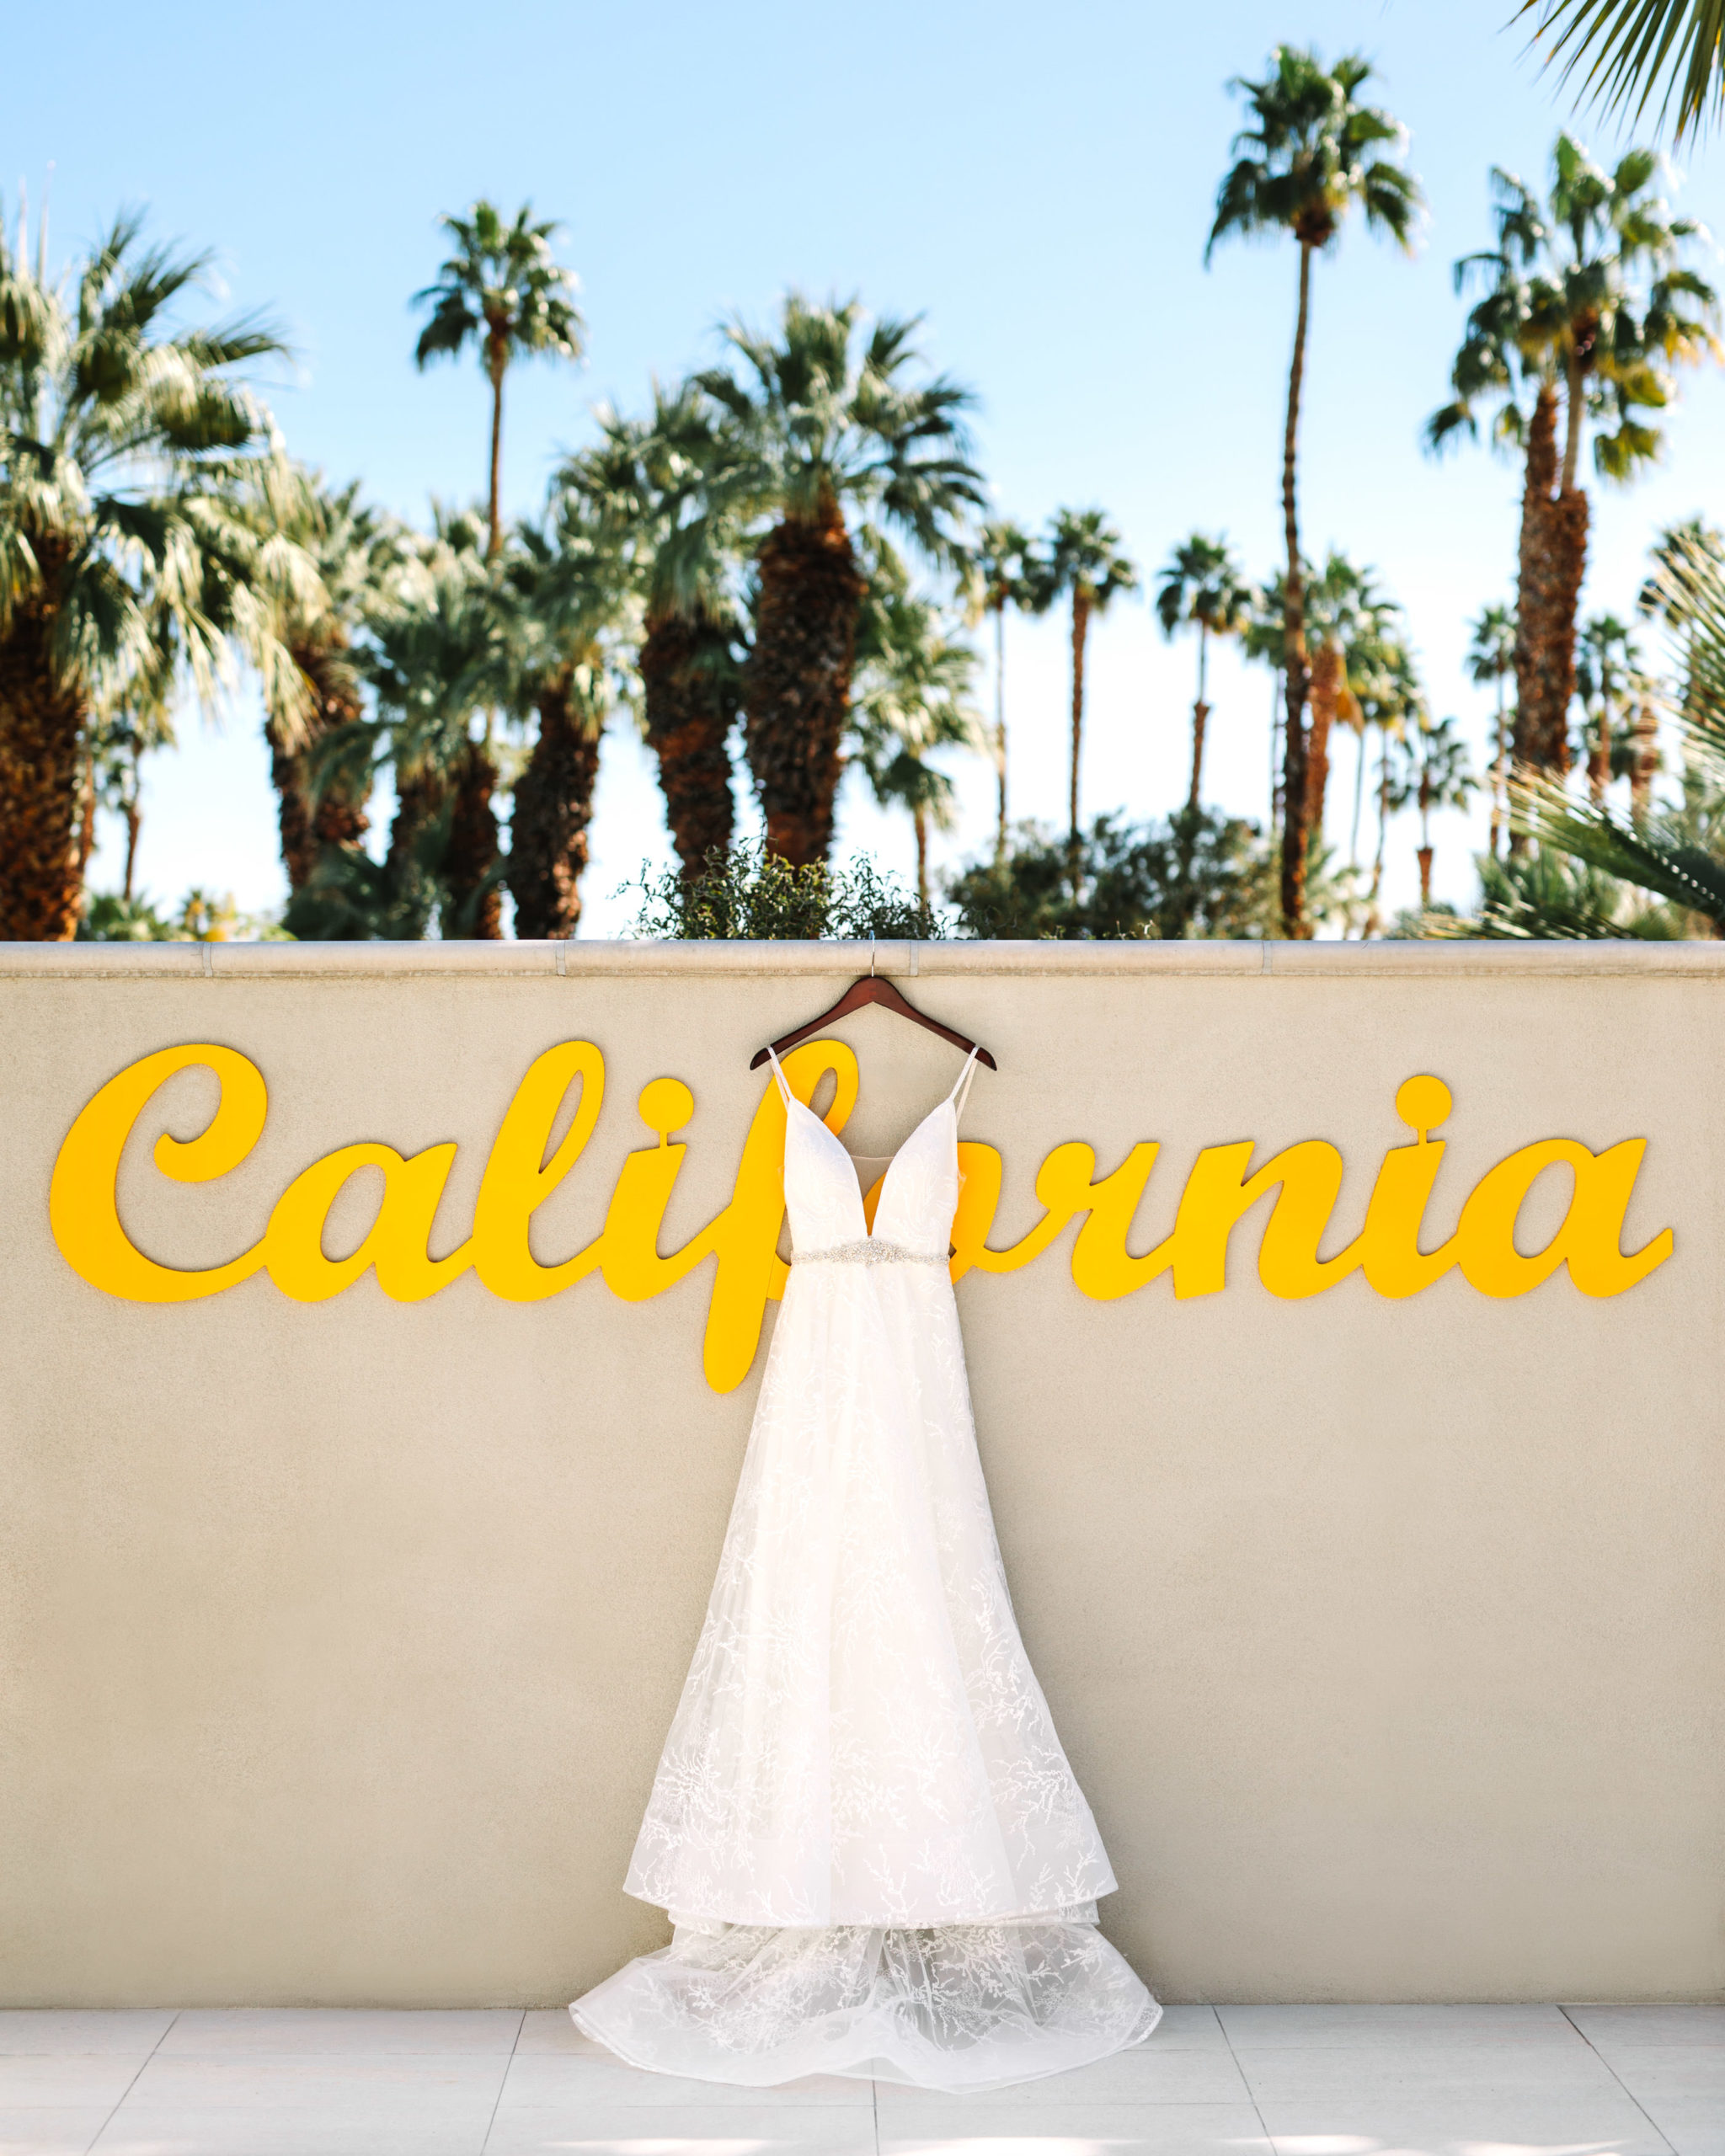 Dress hanging on yellow California sign at Hotel Paseo | Living Desert Zoo & Gardens wedding with unique details | Elevated and colorful wedding photography for fun-loving couples in Southern California | #PalmSprings #palmspringsphotographer #gardenwedding #palmspringswedding Source: Mary Costa Photography | Los Angeles wedding photographer